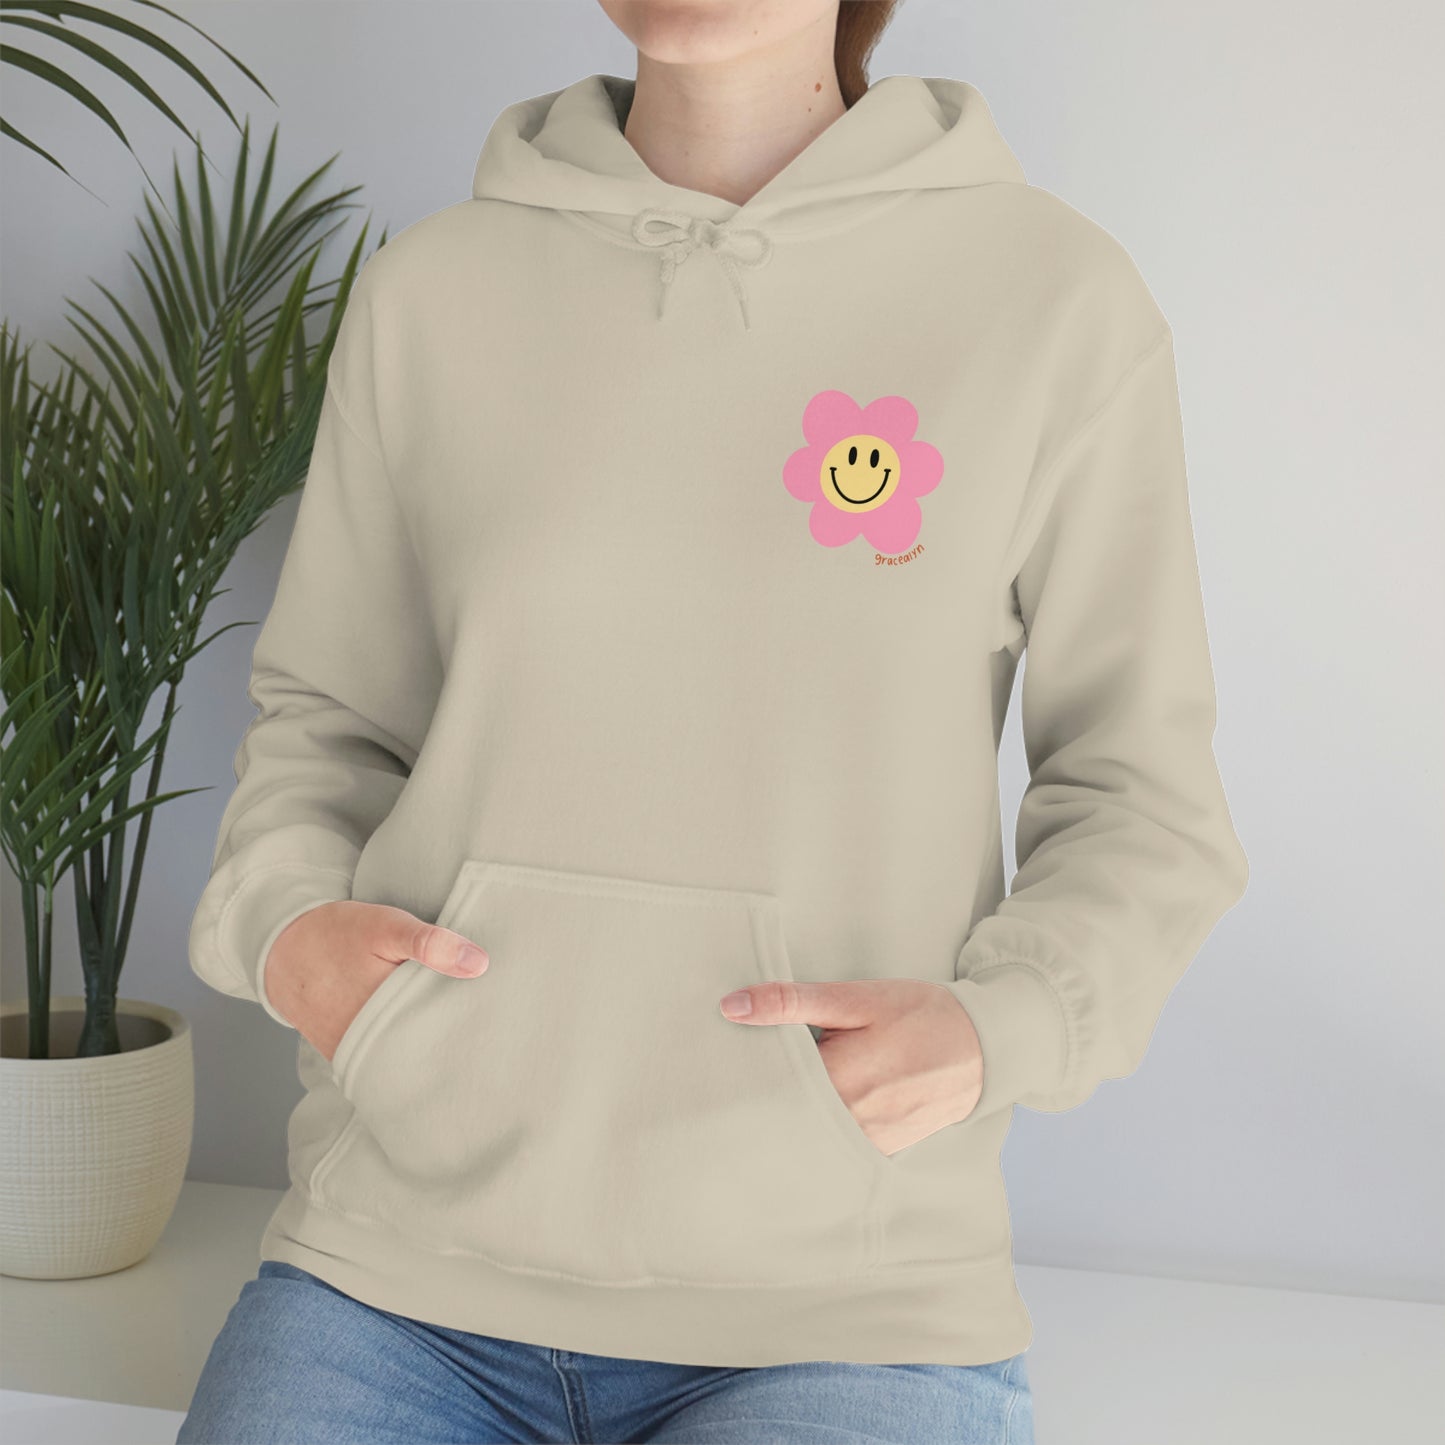 It's Cool To Be Kind Hooded Sweatshirt